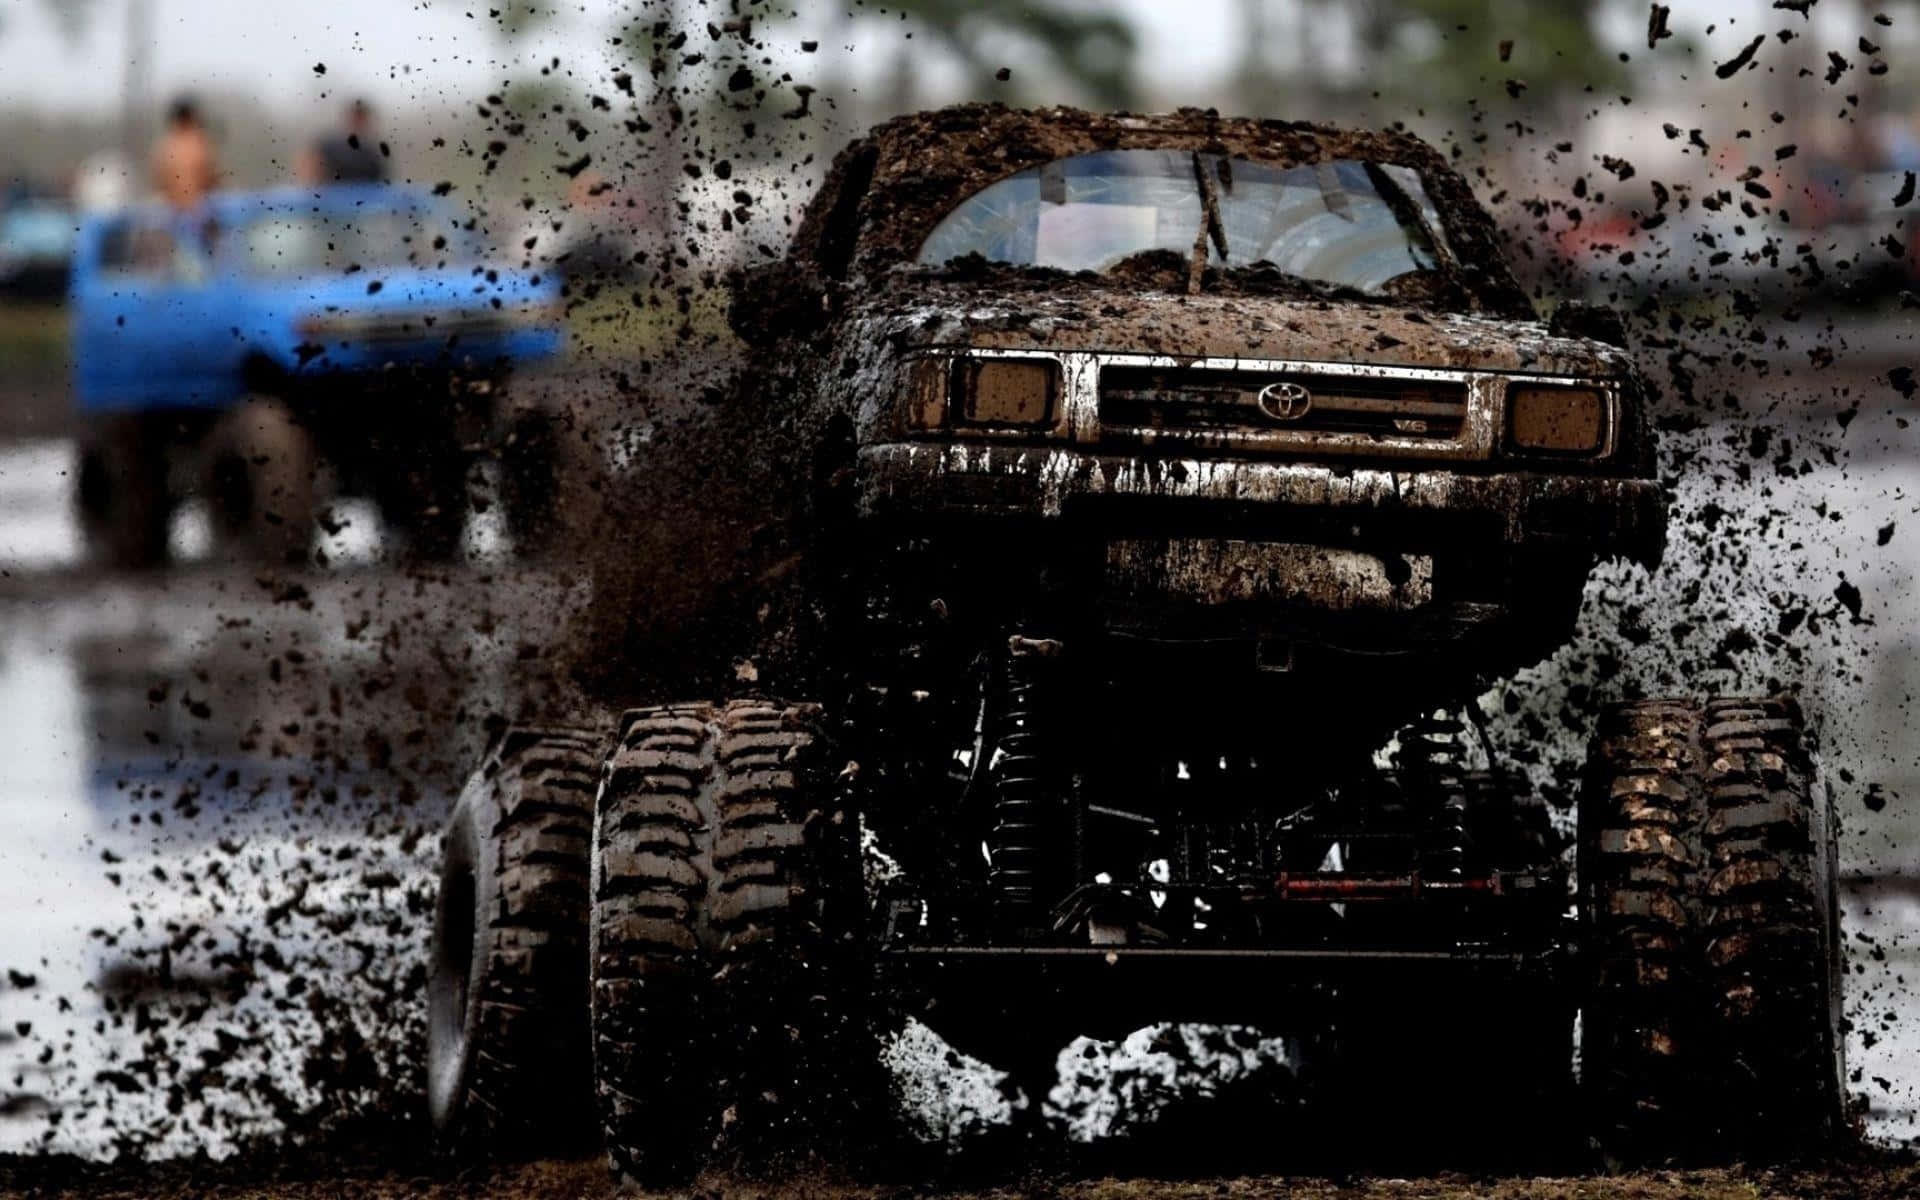 Thrilling adventure with a monster truck plowing through the mud Wallpaper